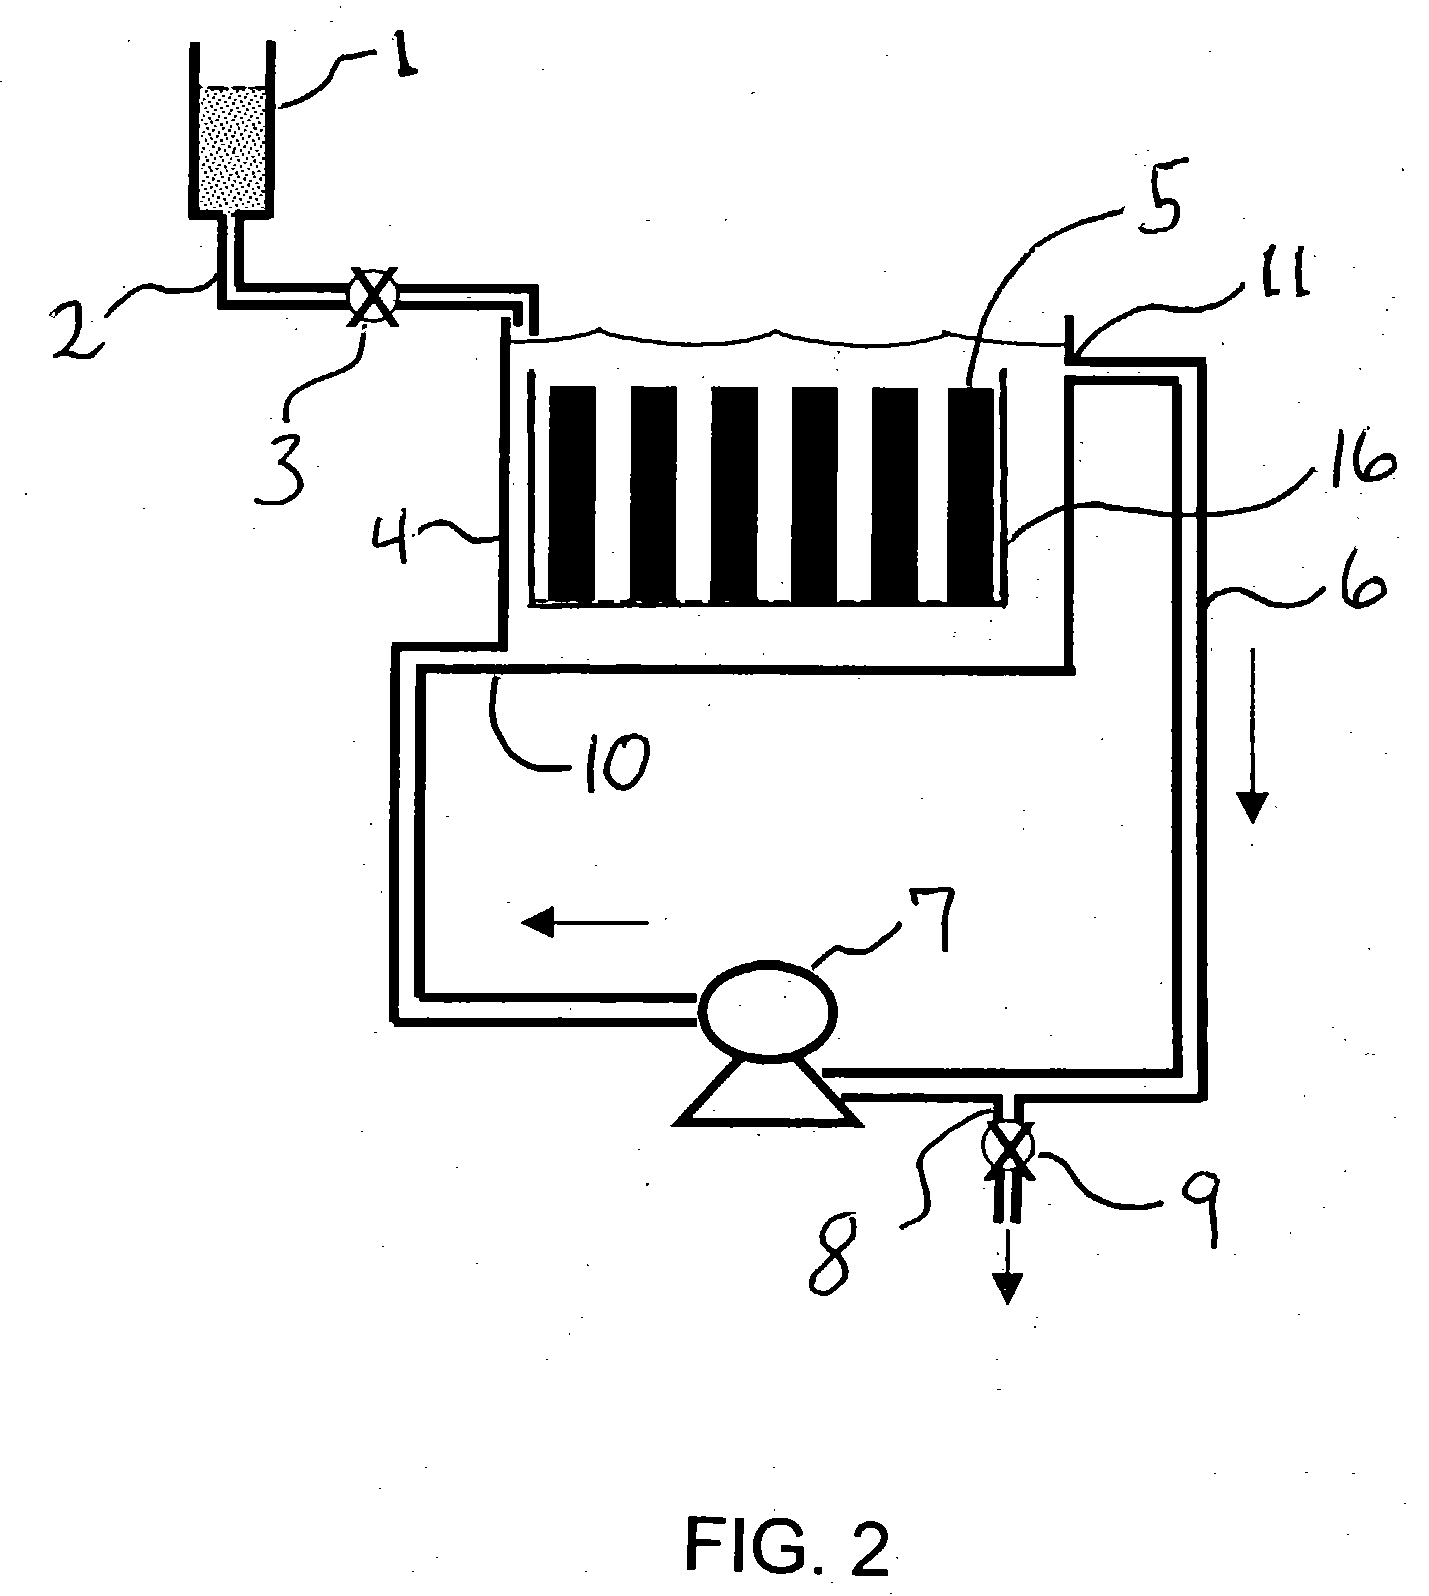 Method of inhibiting corrosion of copper plated or metallized surfaces and circuitry during semiconductor manufacturing processes